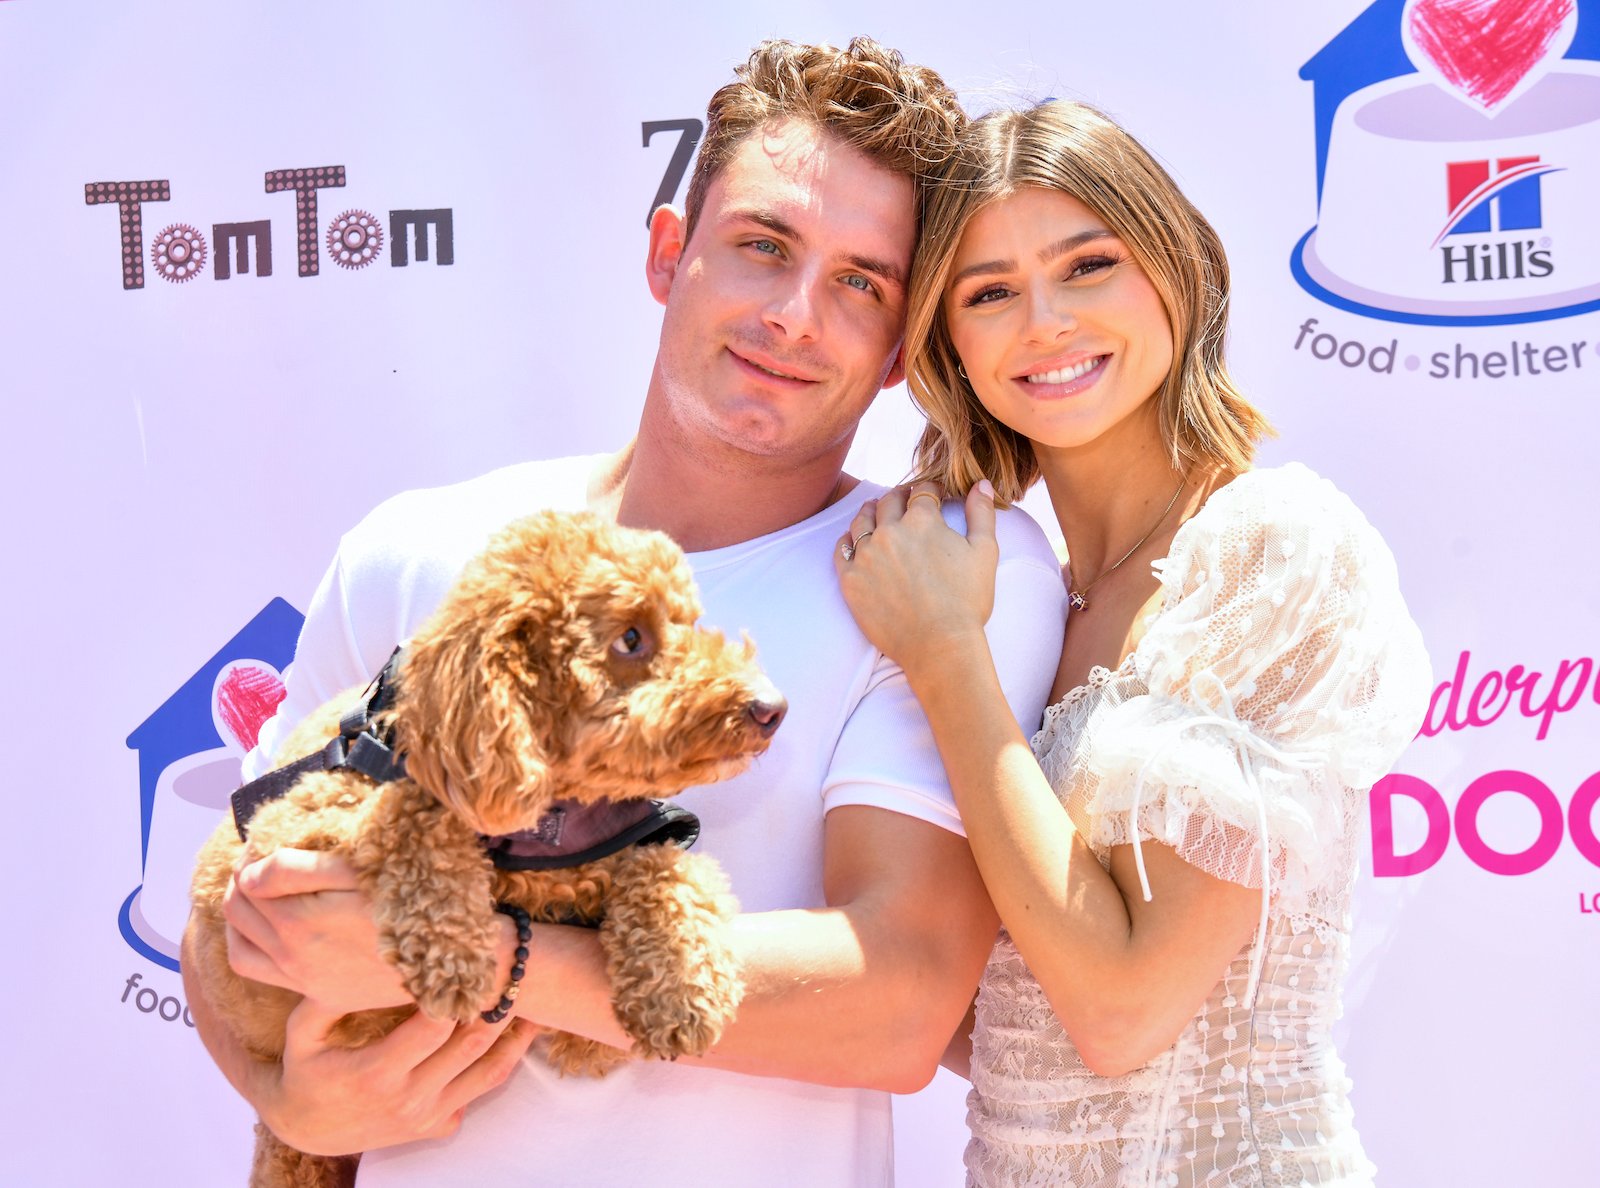 James Kennedy and Raquel Leviss from Vanderpump Rules attend the 5th Annual World Dog Day in West Hollywood